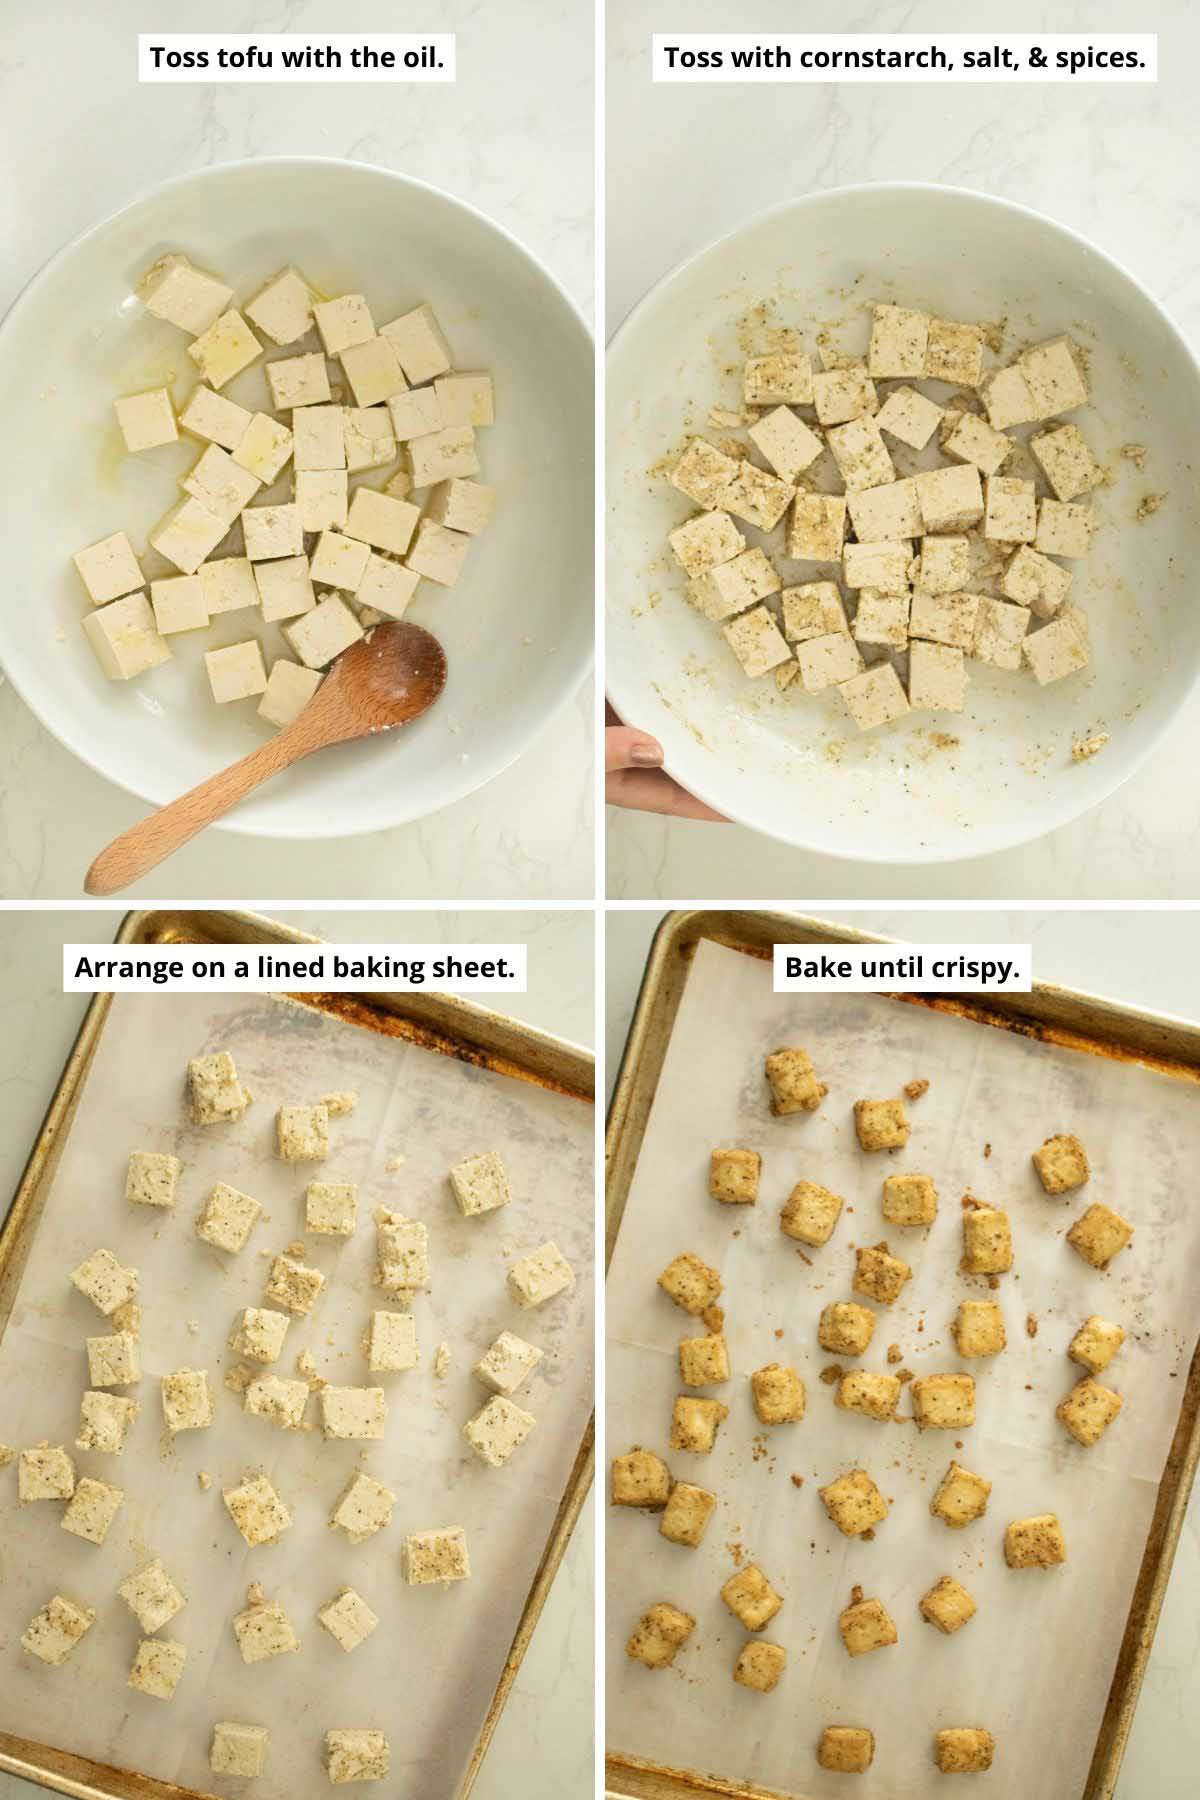 image collage showing tofu tossed in olive oil, in cornstarch and spices, spread on the baking sheet, and after baking